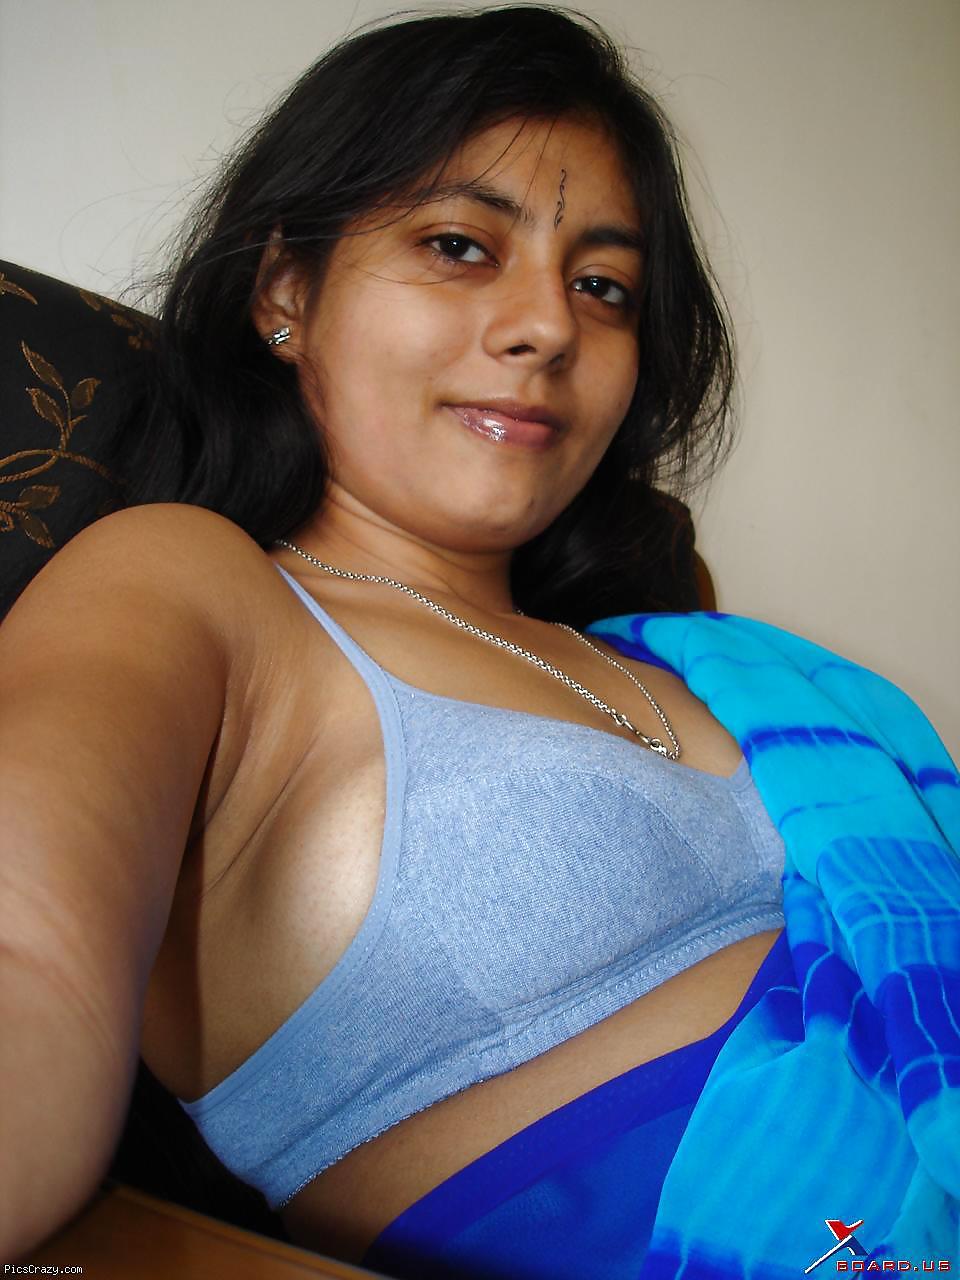 Indian nude12 #3540962